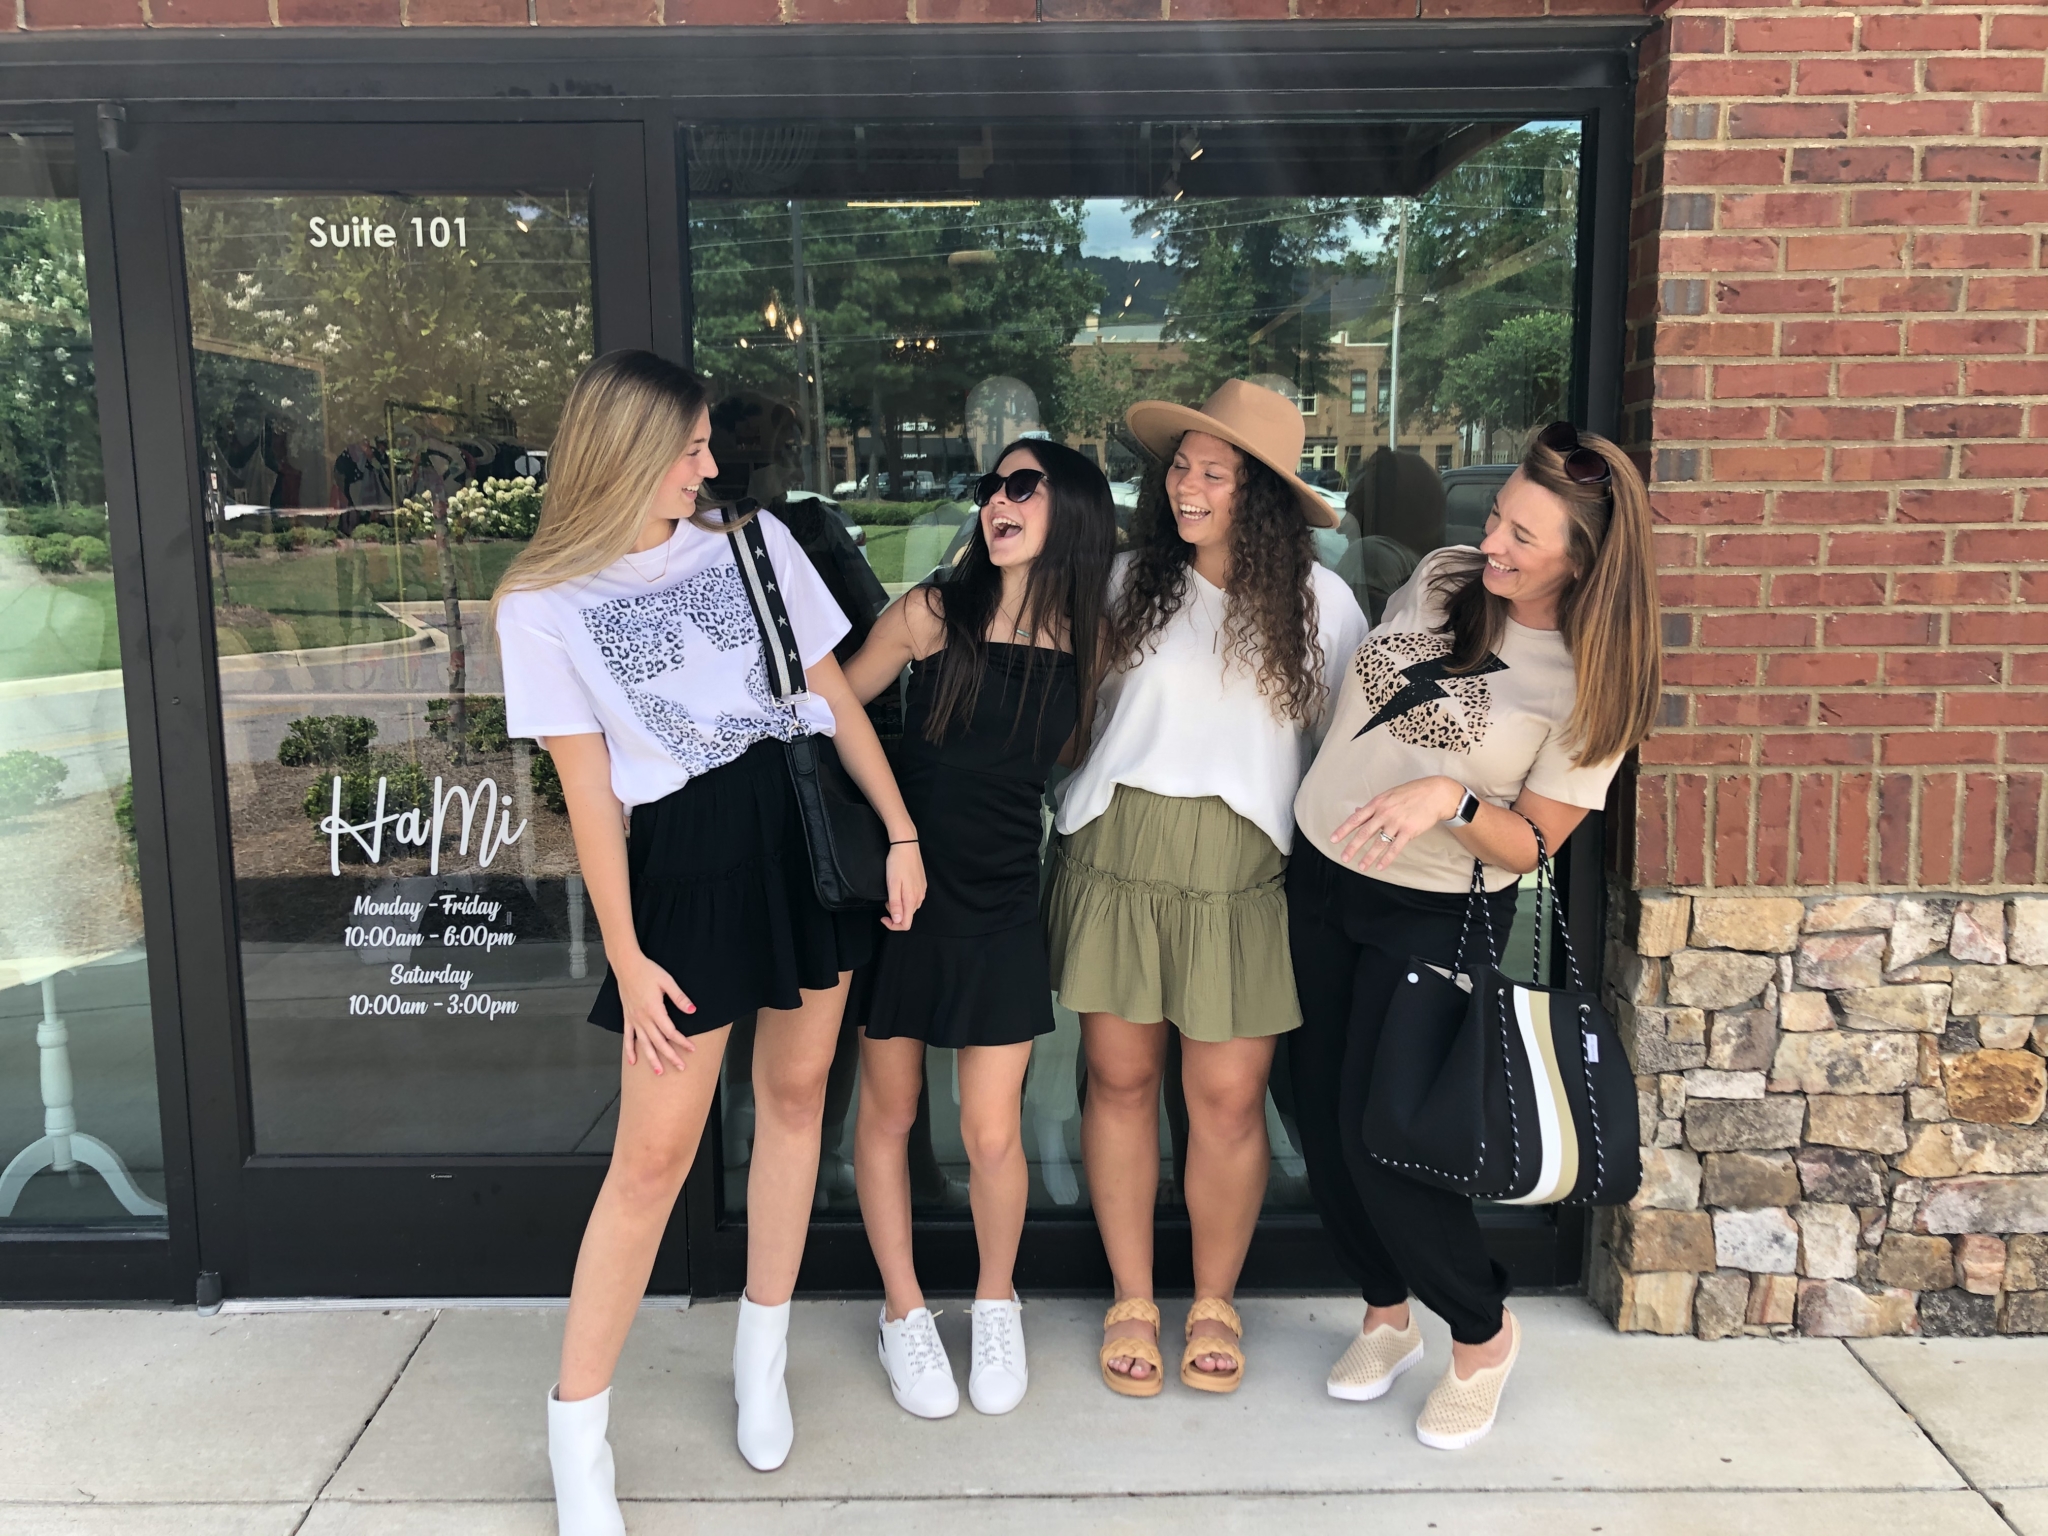 Summer trends according to Bham boutiques + how to shop them